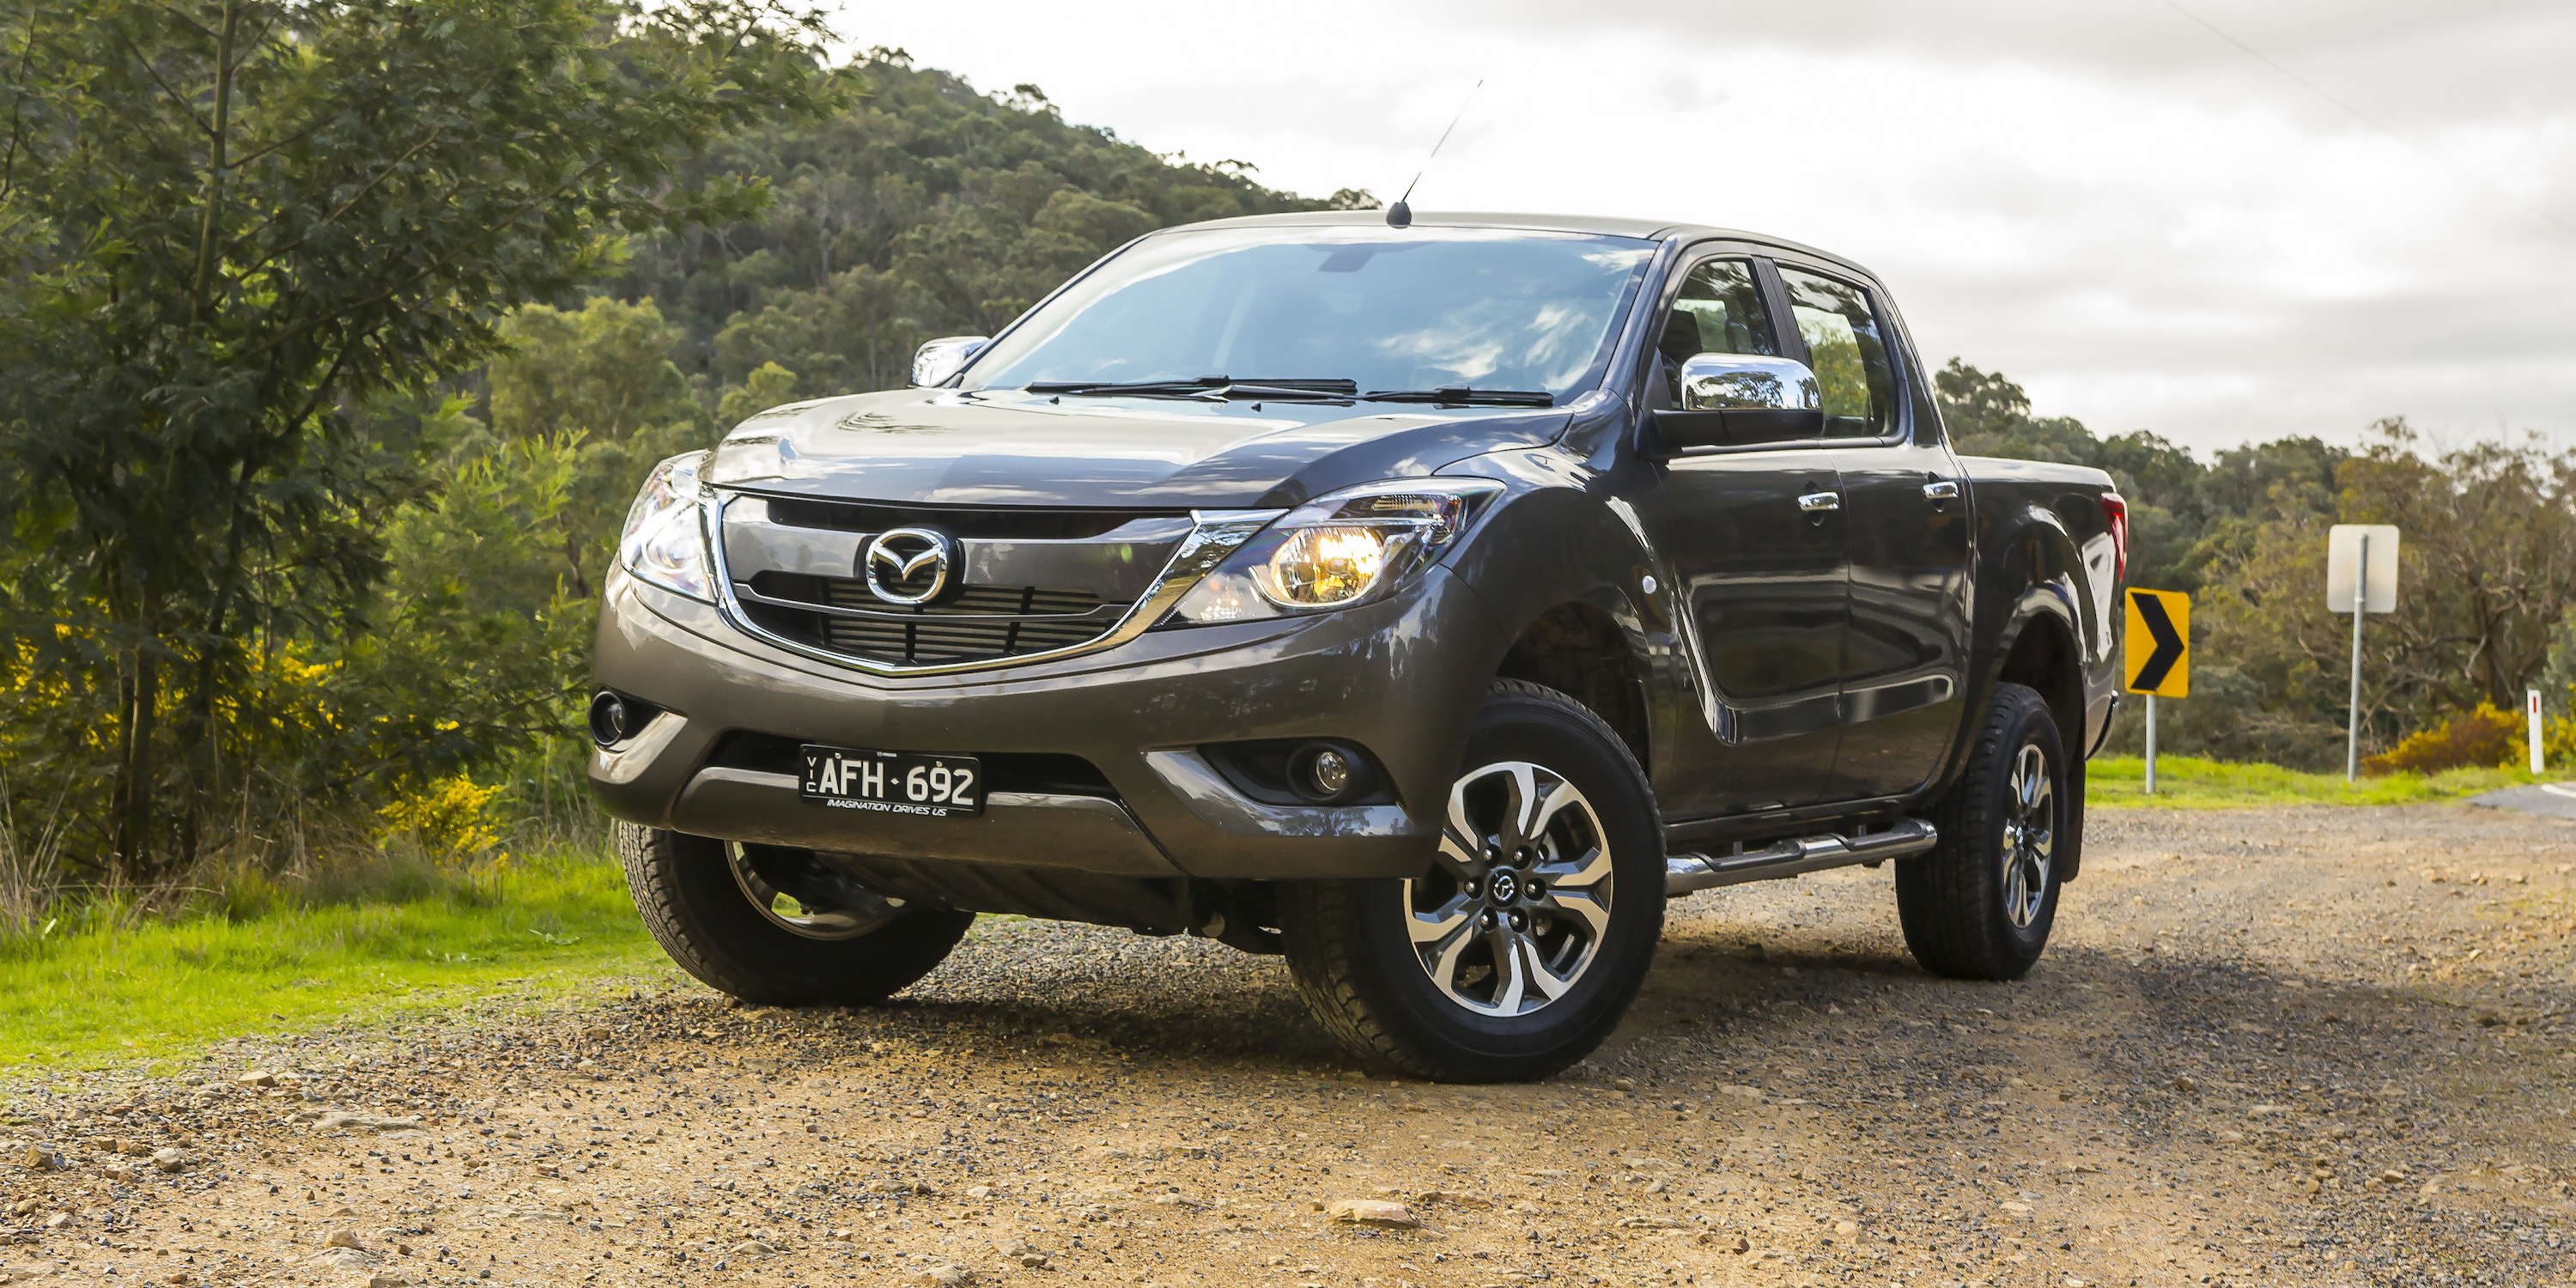 Ford Ranger vs Mazda BT-50 Pro - Which is Better?